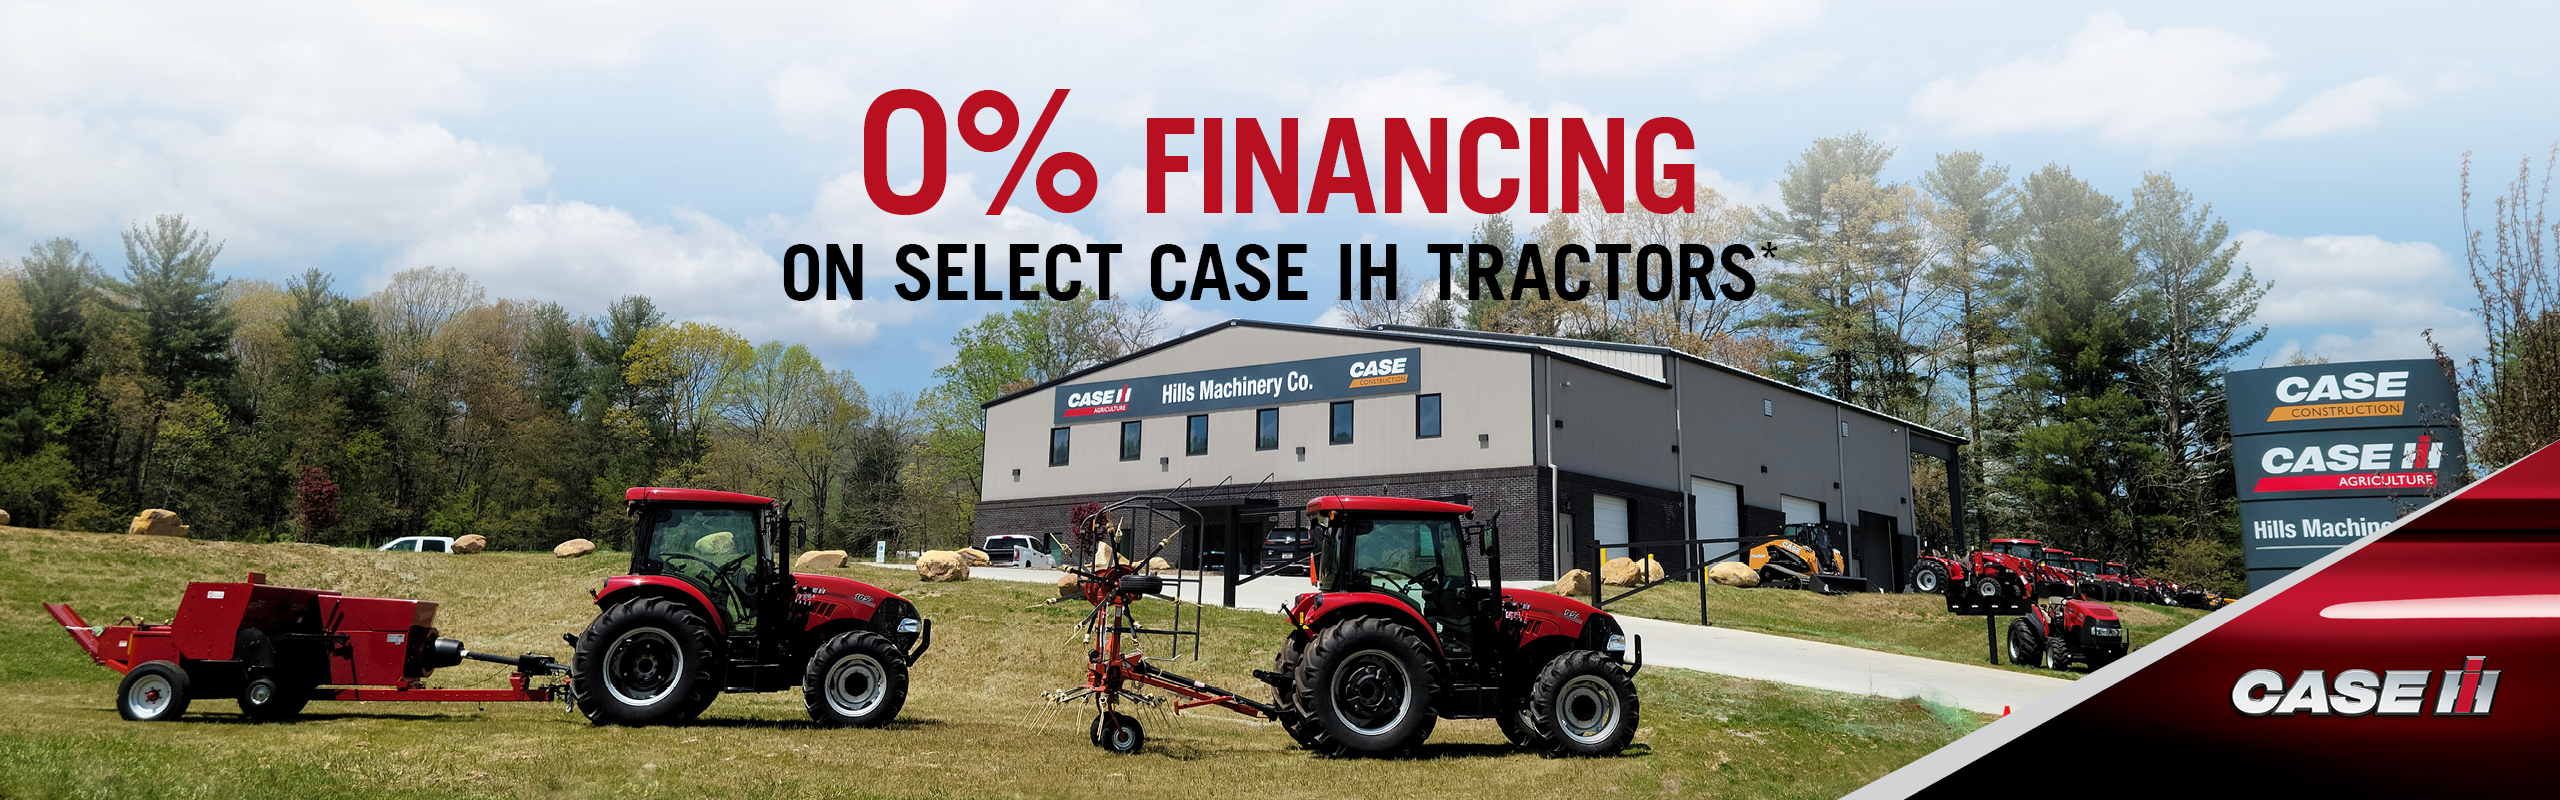 0% Financing on select Case IH Tractors